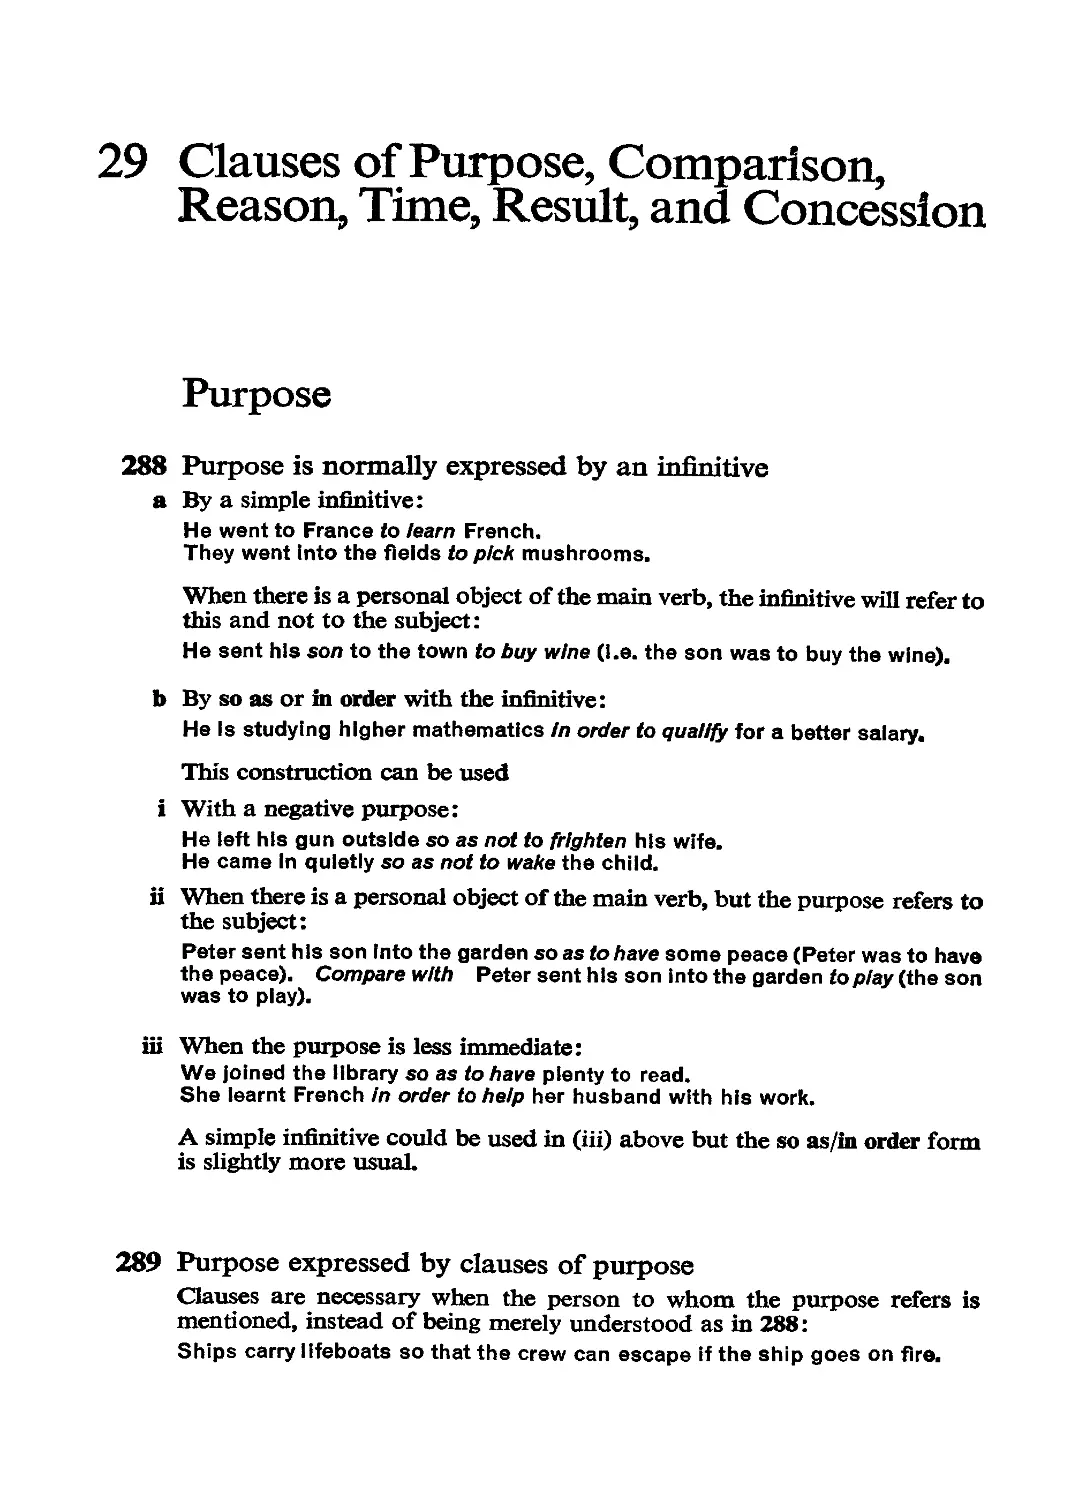 Clauses of Purpose, Comparison, Reason, Time, Result, and Concession